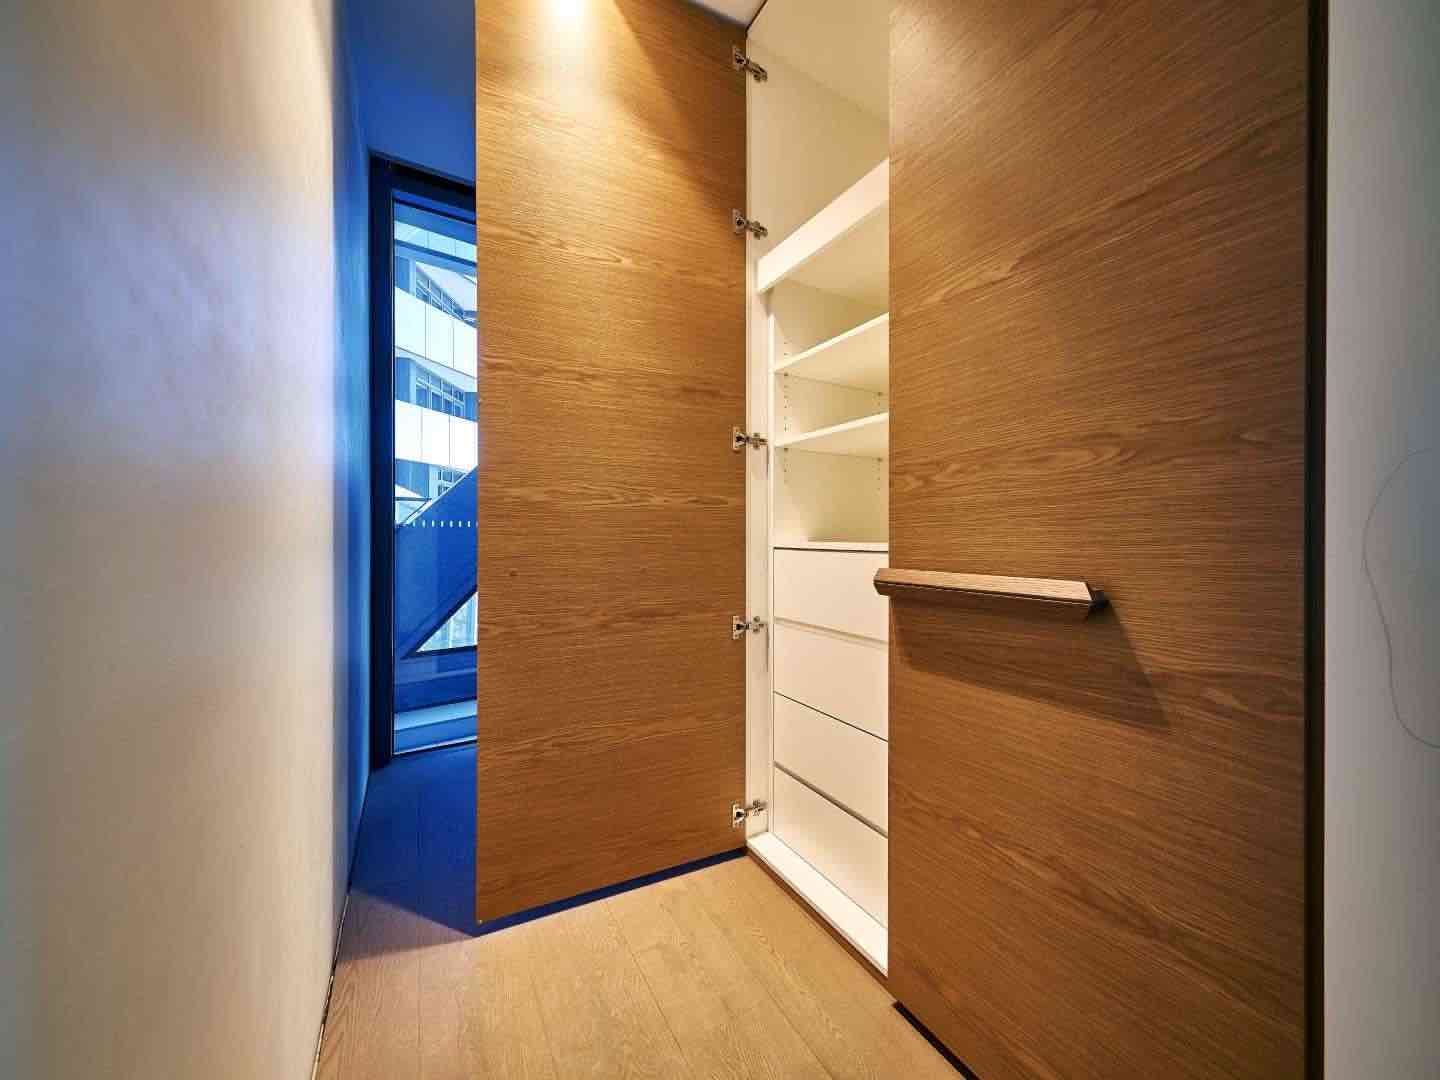 Palace Teak Wall-mounted Wardrobe shelving with hinged doors and white shelves and handleless drawers